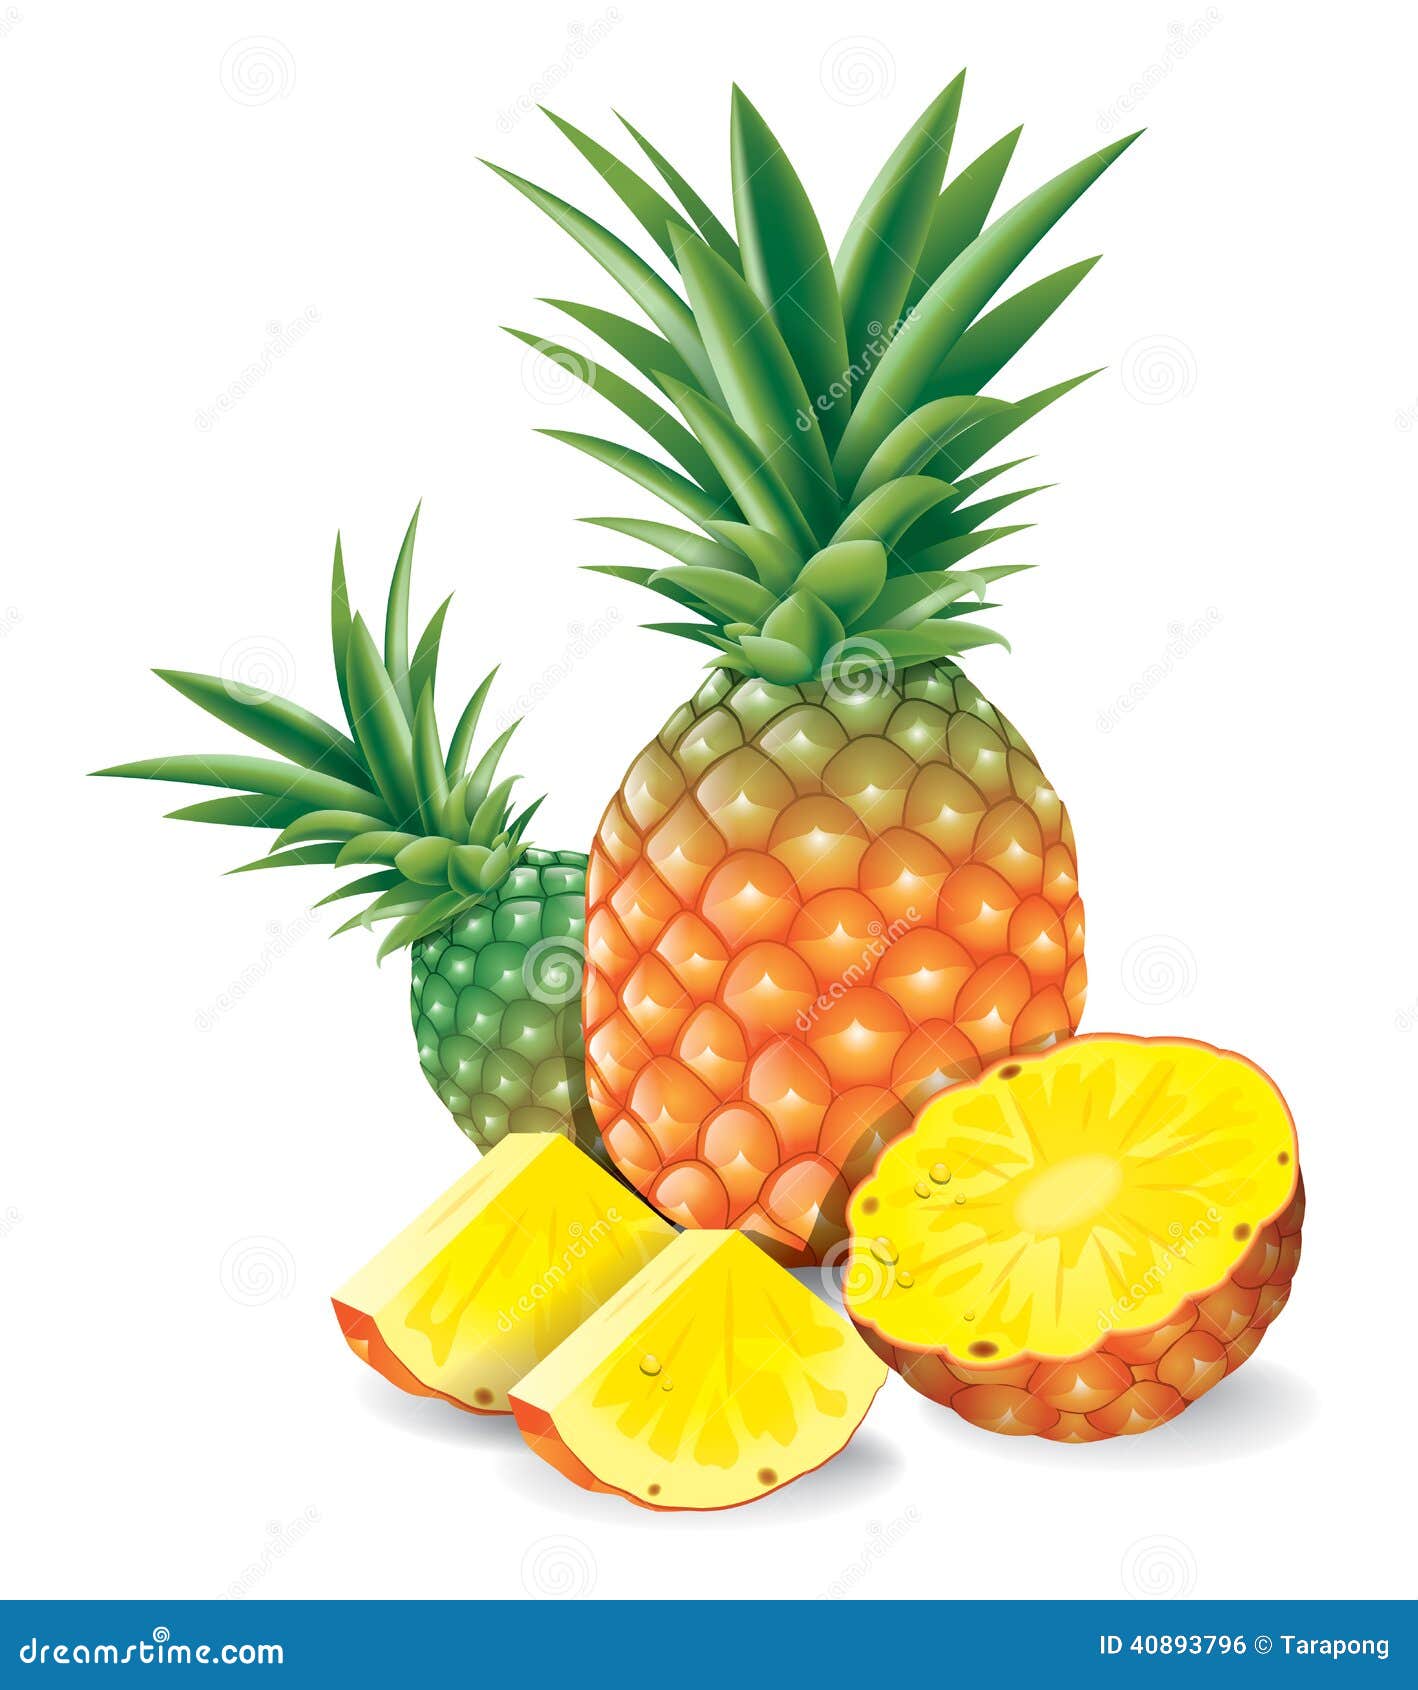 fresh pineapple with slices  .